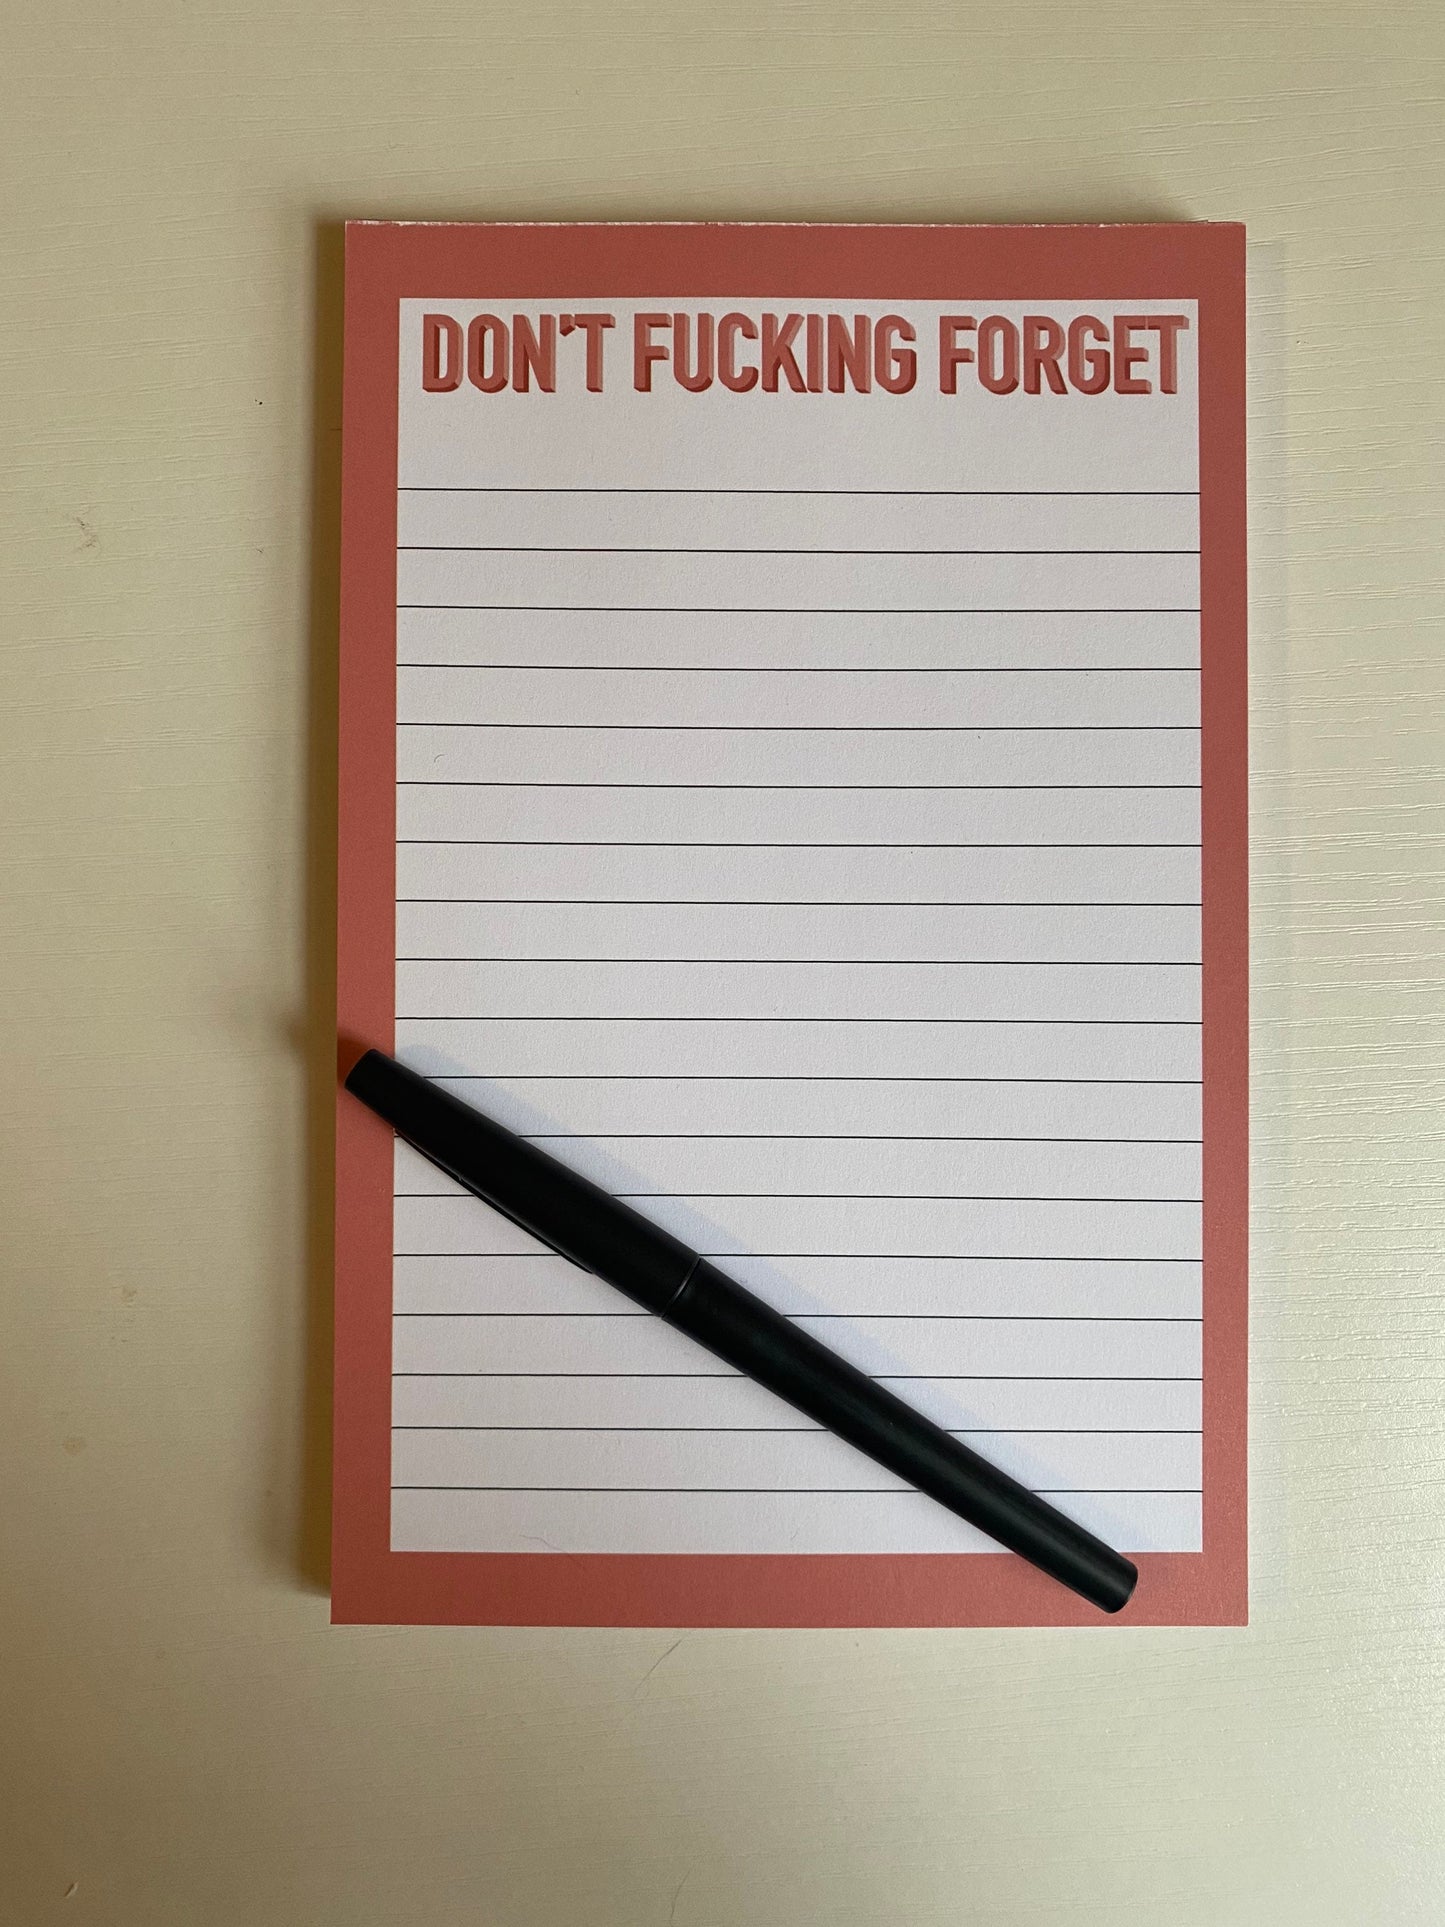 Don't F*CKING Forget Notepad, Explicit Stationary, Explicit Notebook, Don't Fucking forget To do list